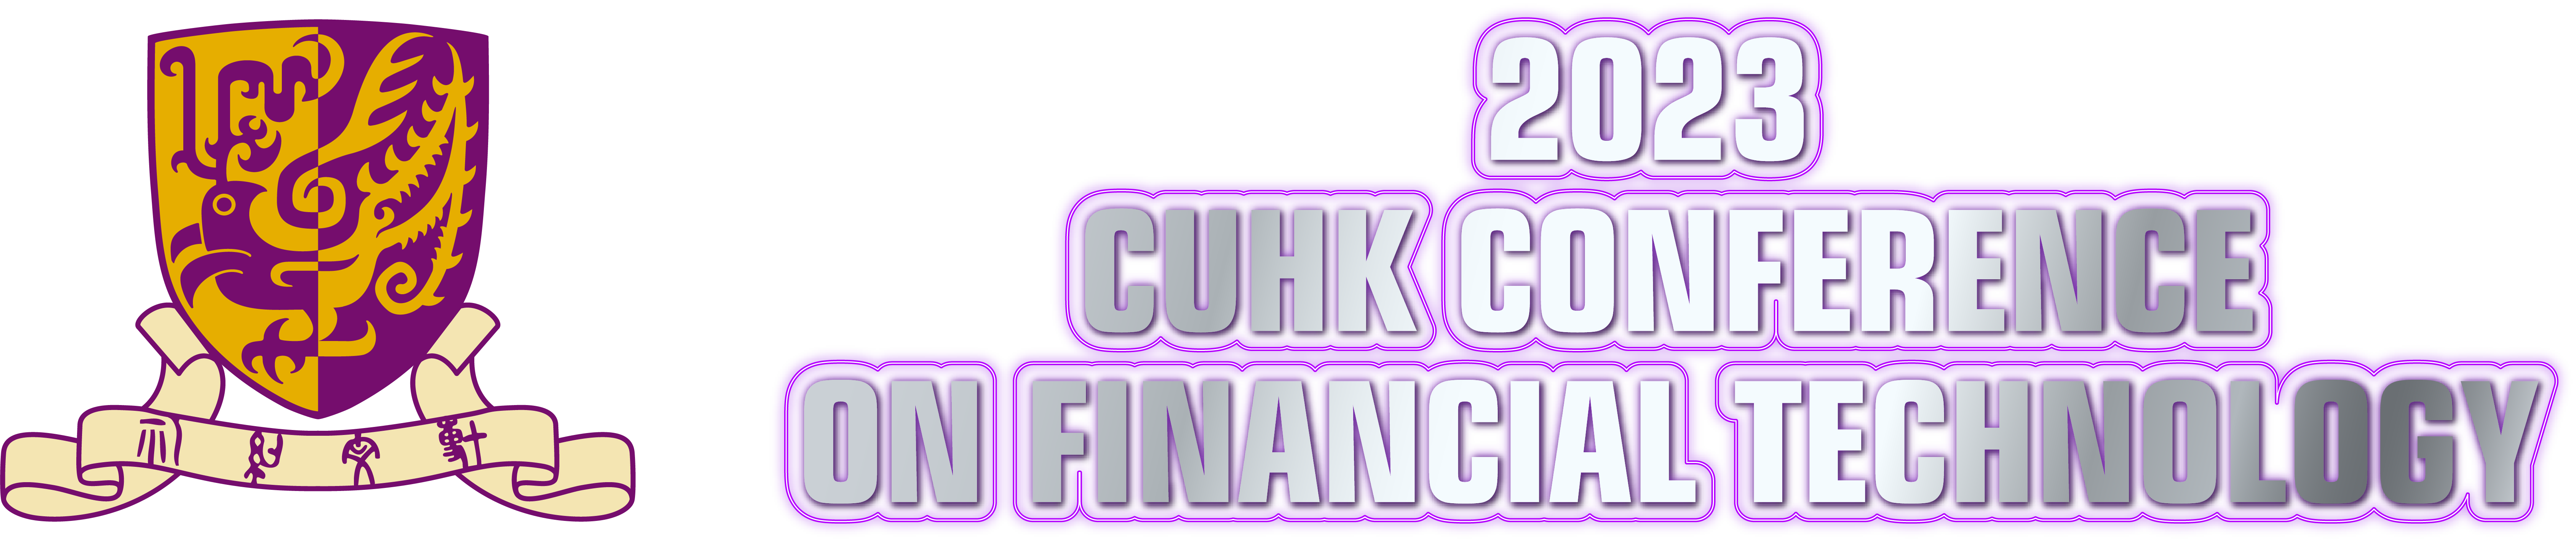 2023 CUHK Conference on Financial Technology